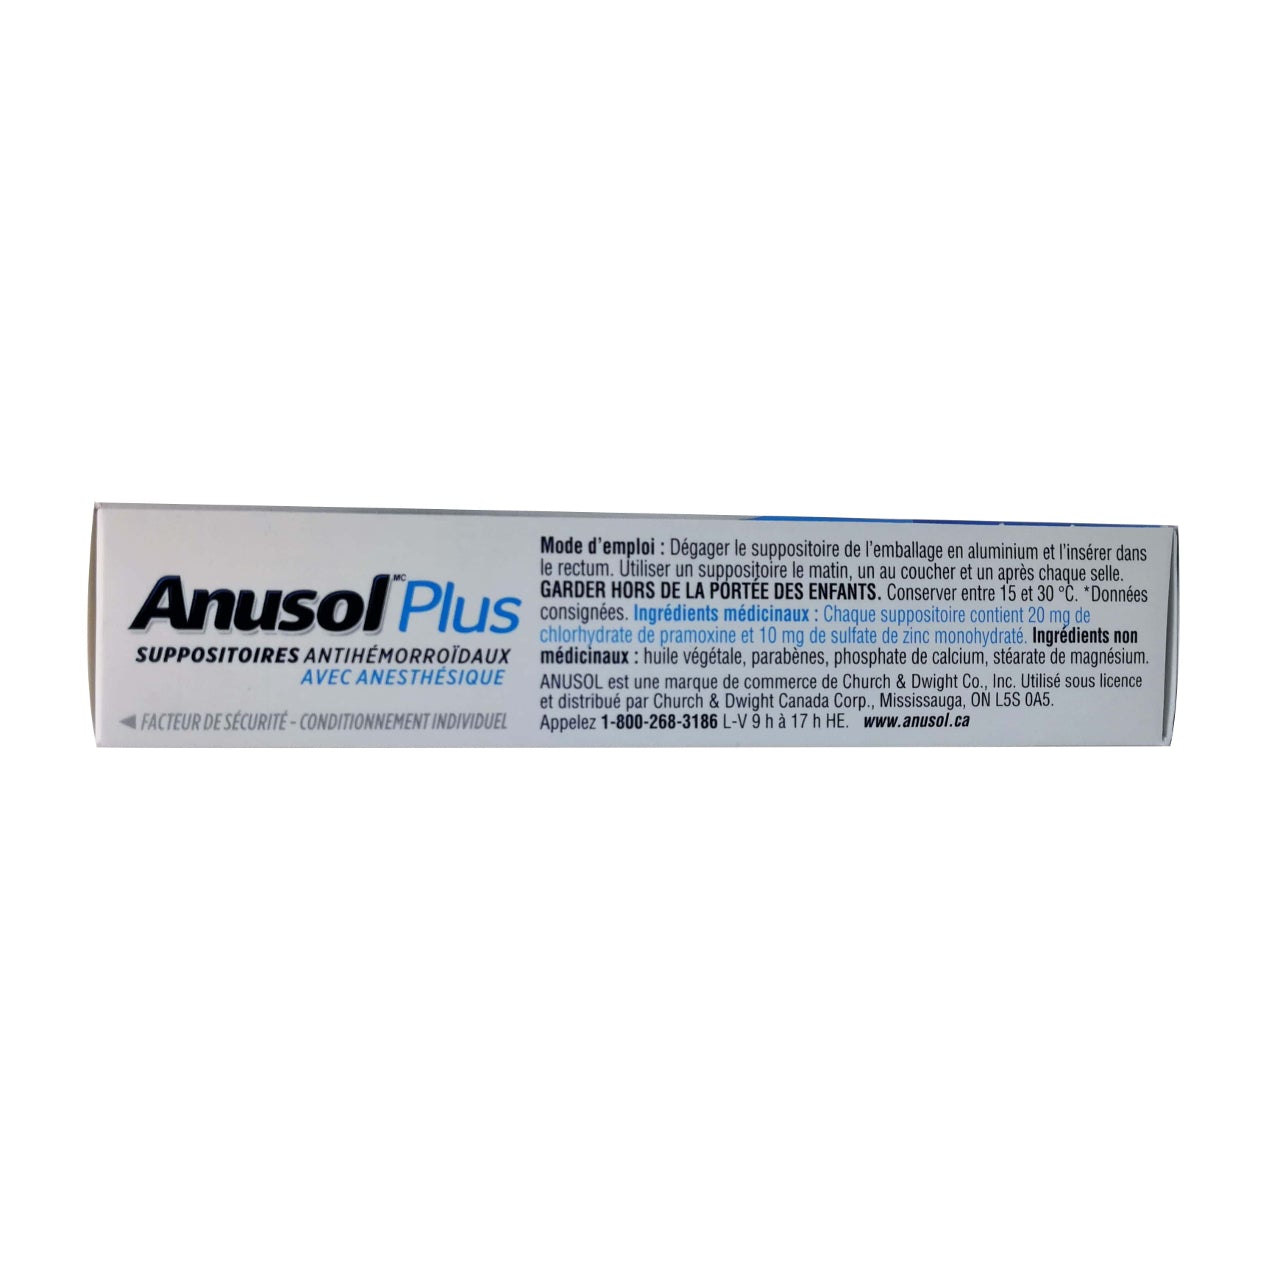 Product details, directions, ingredients, and cautions for Anusol Plus Hemorrhoidal Suppositories with Anesthetic (Suppositories) 24 pack in French